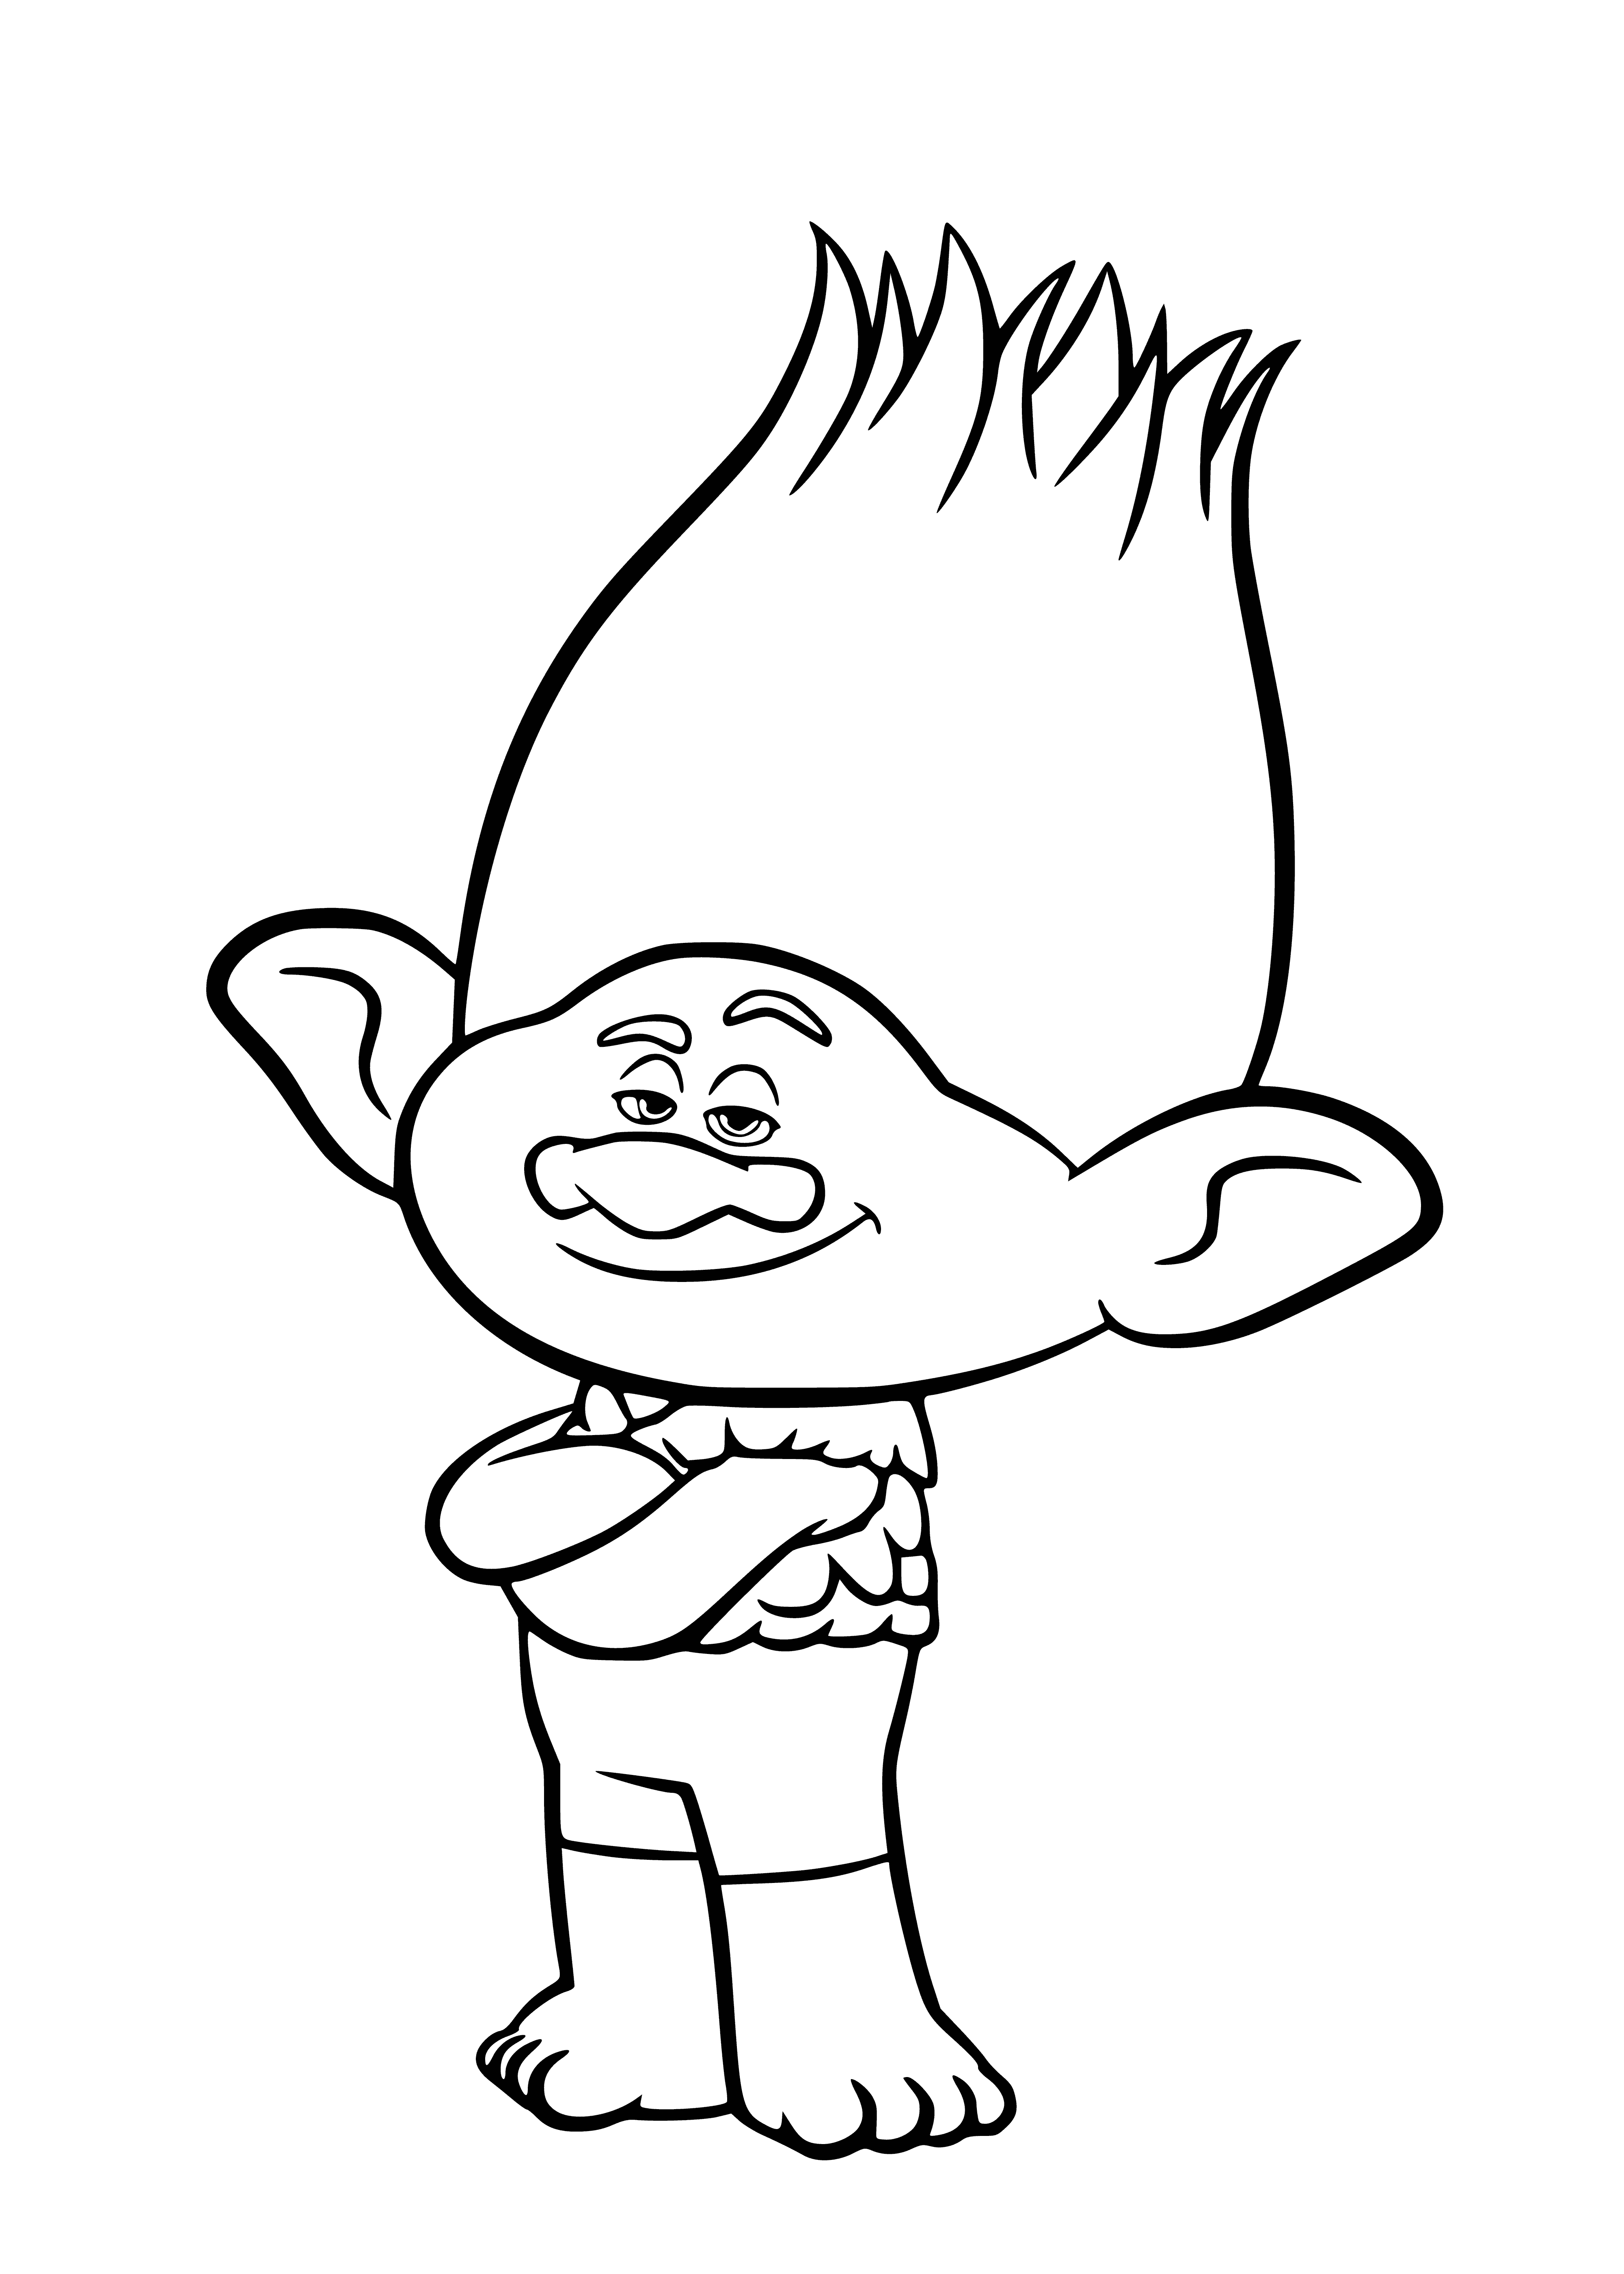 coloring page: Tsvetan the orange troll with yellow hair holds a big knife and wears a green shirt and blue jeans.